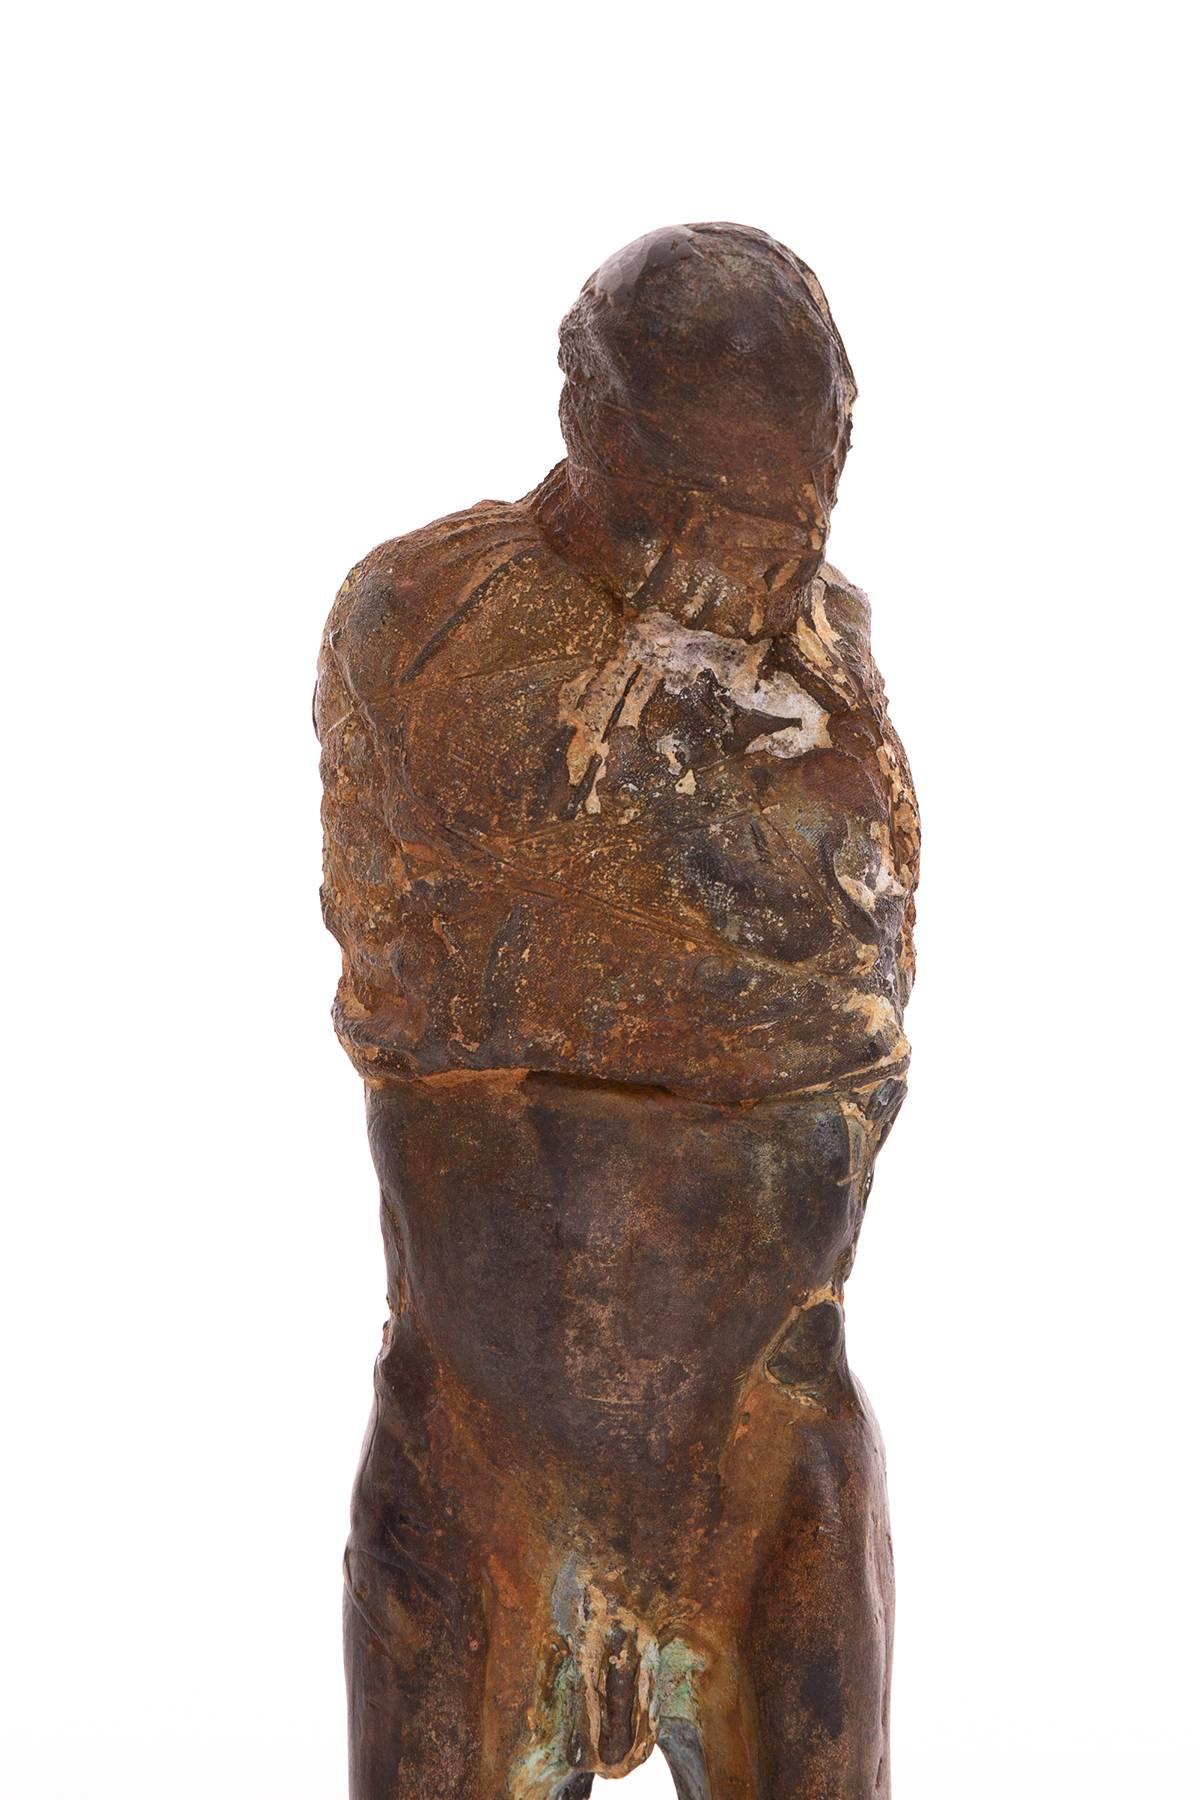 Expressive abstract bronze male figure by Arizona artist Carl Dahl, circa early 1970s. This extraordinary example exudes strong emotion and looks stunning from every angle.